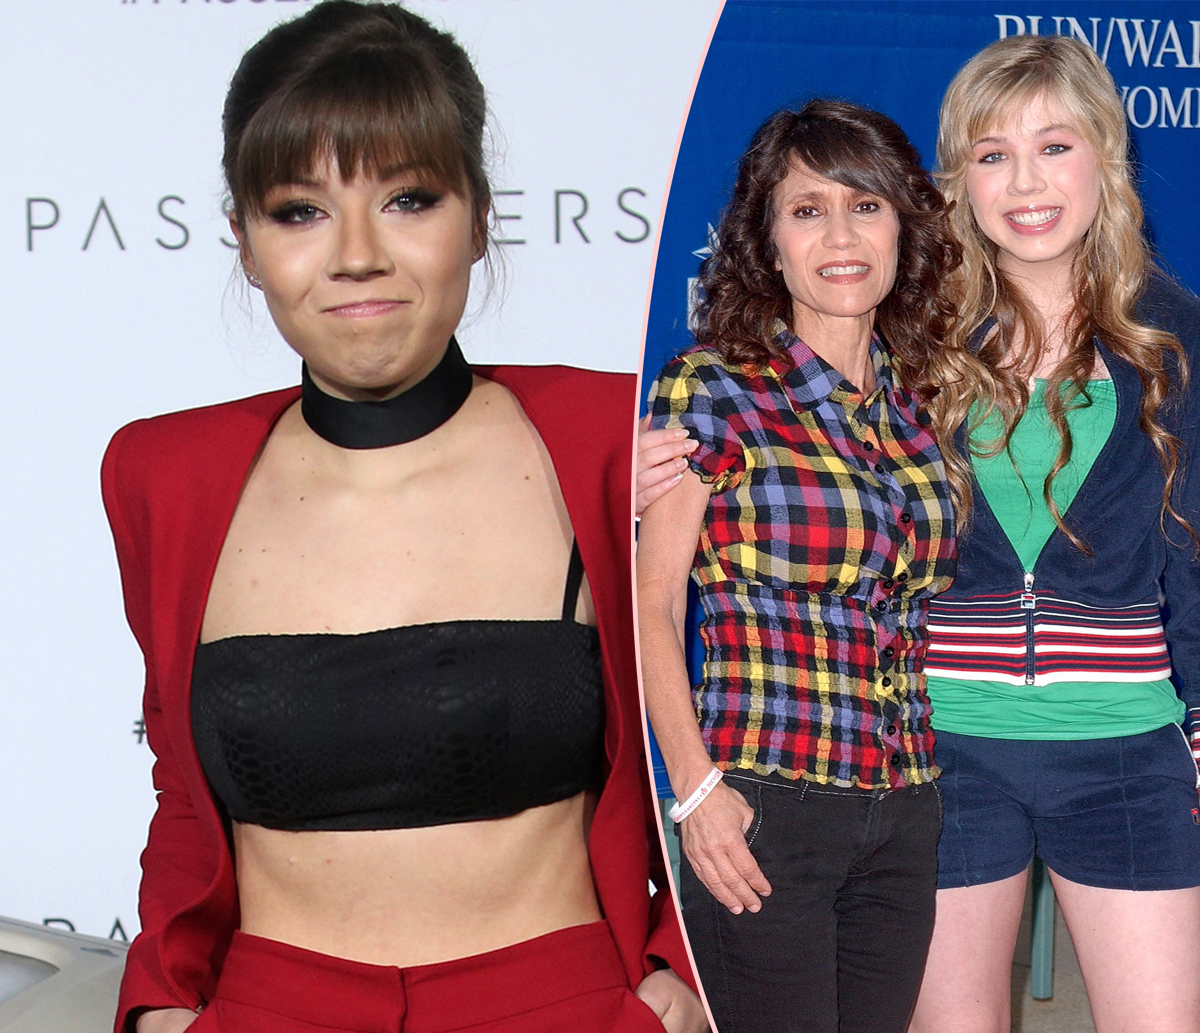 McCurdy Details Her Mother’s ‘Abuse’ & ‘Conditioning’ To